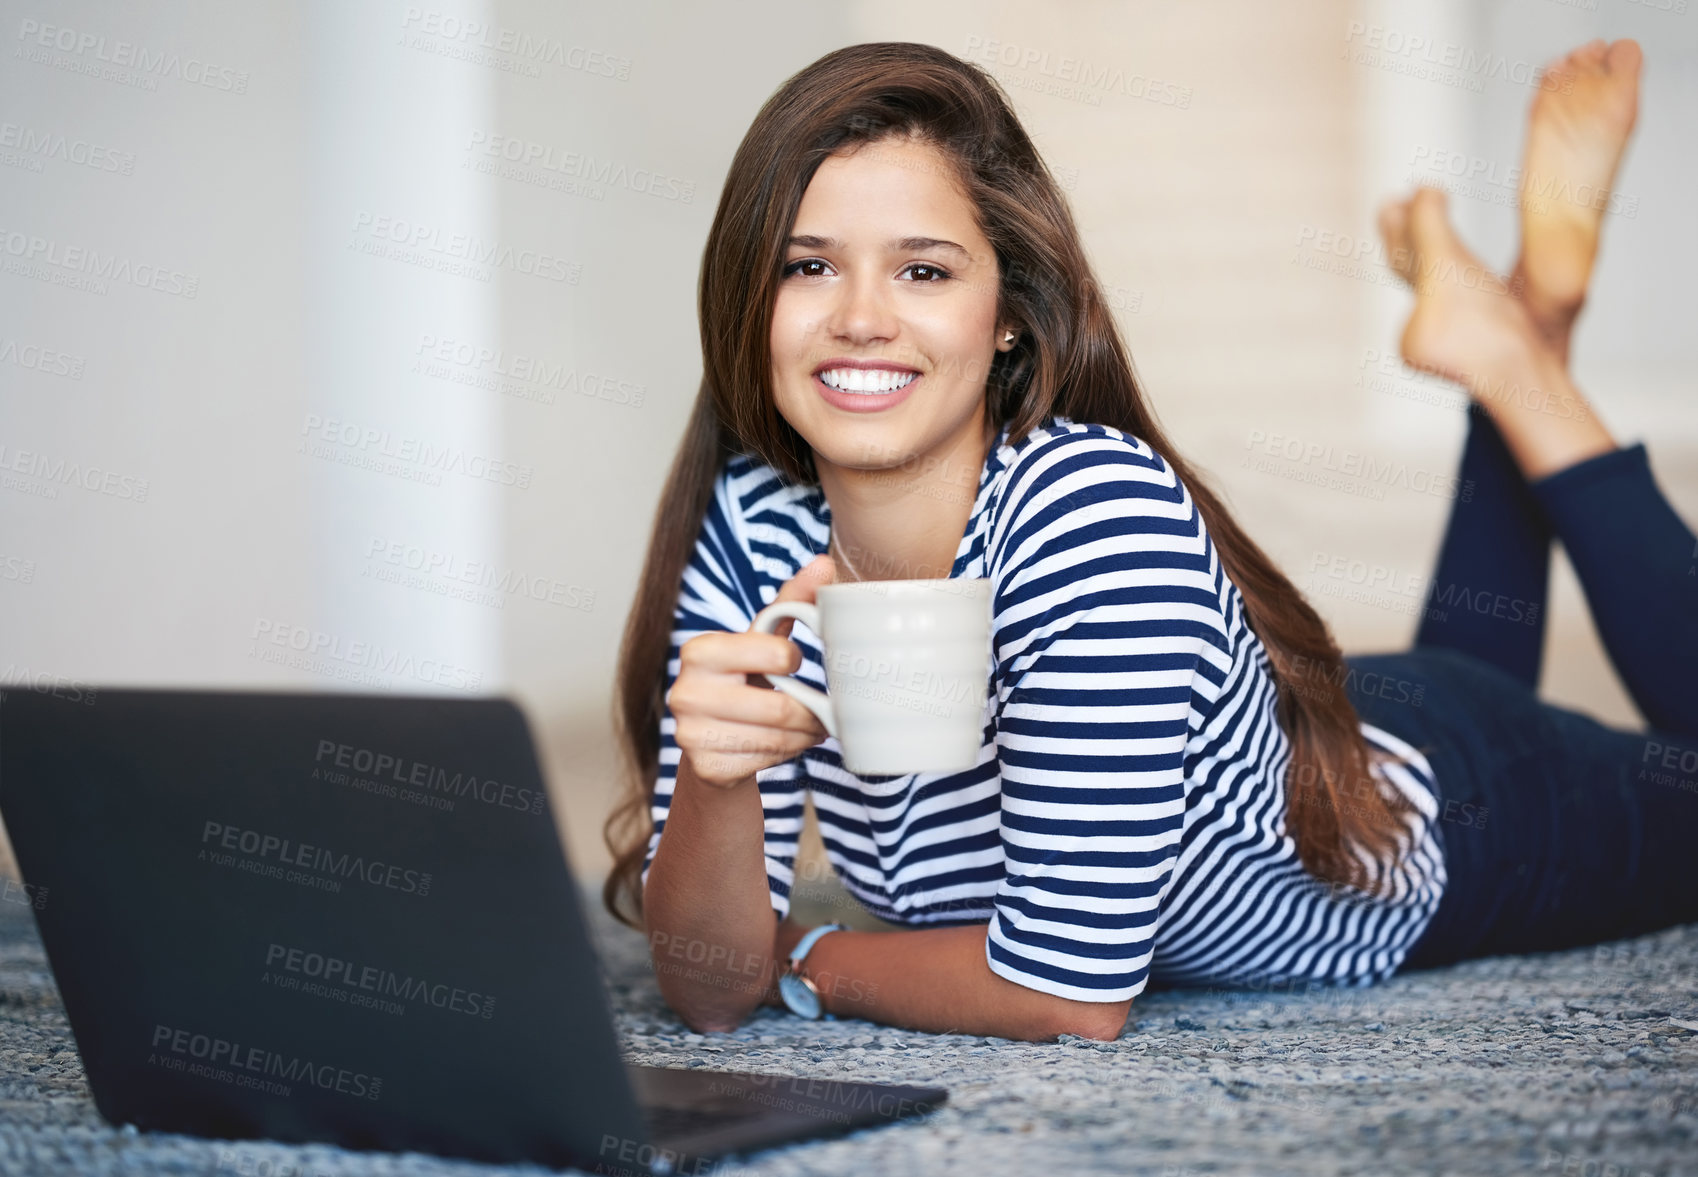 Buy stock photo Portrait of a smiling young woman lying on the floor at home using a laptop